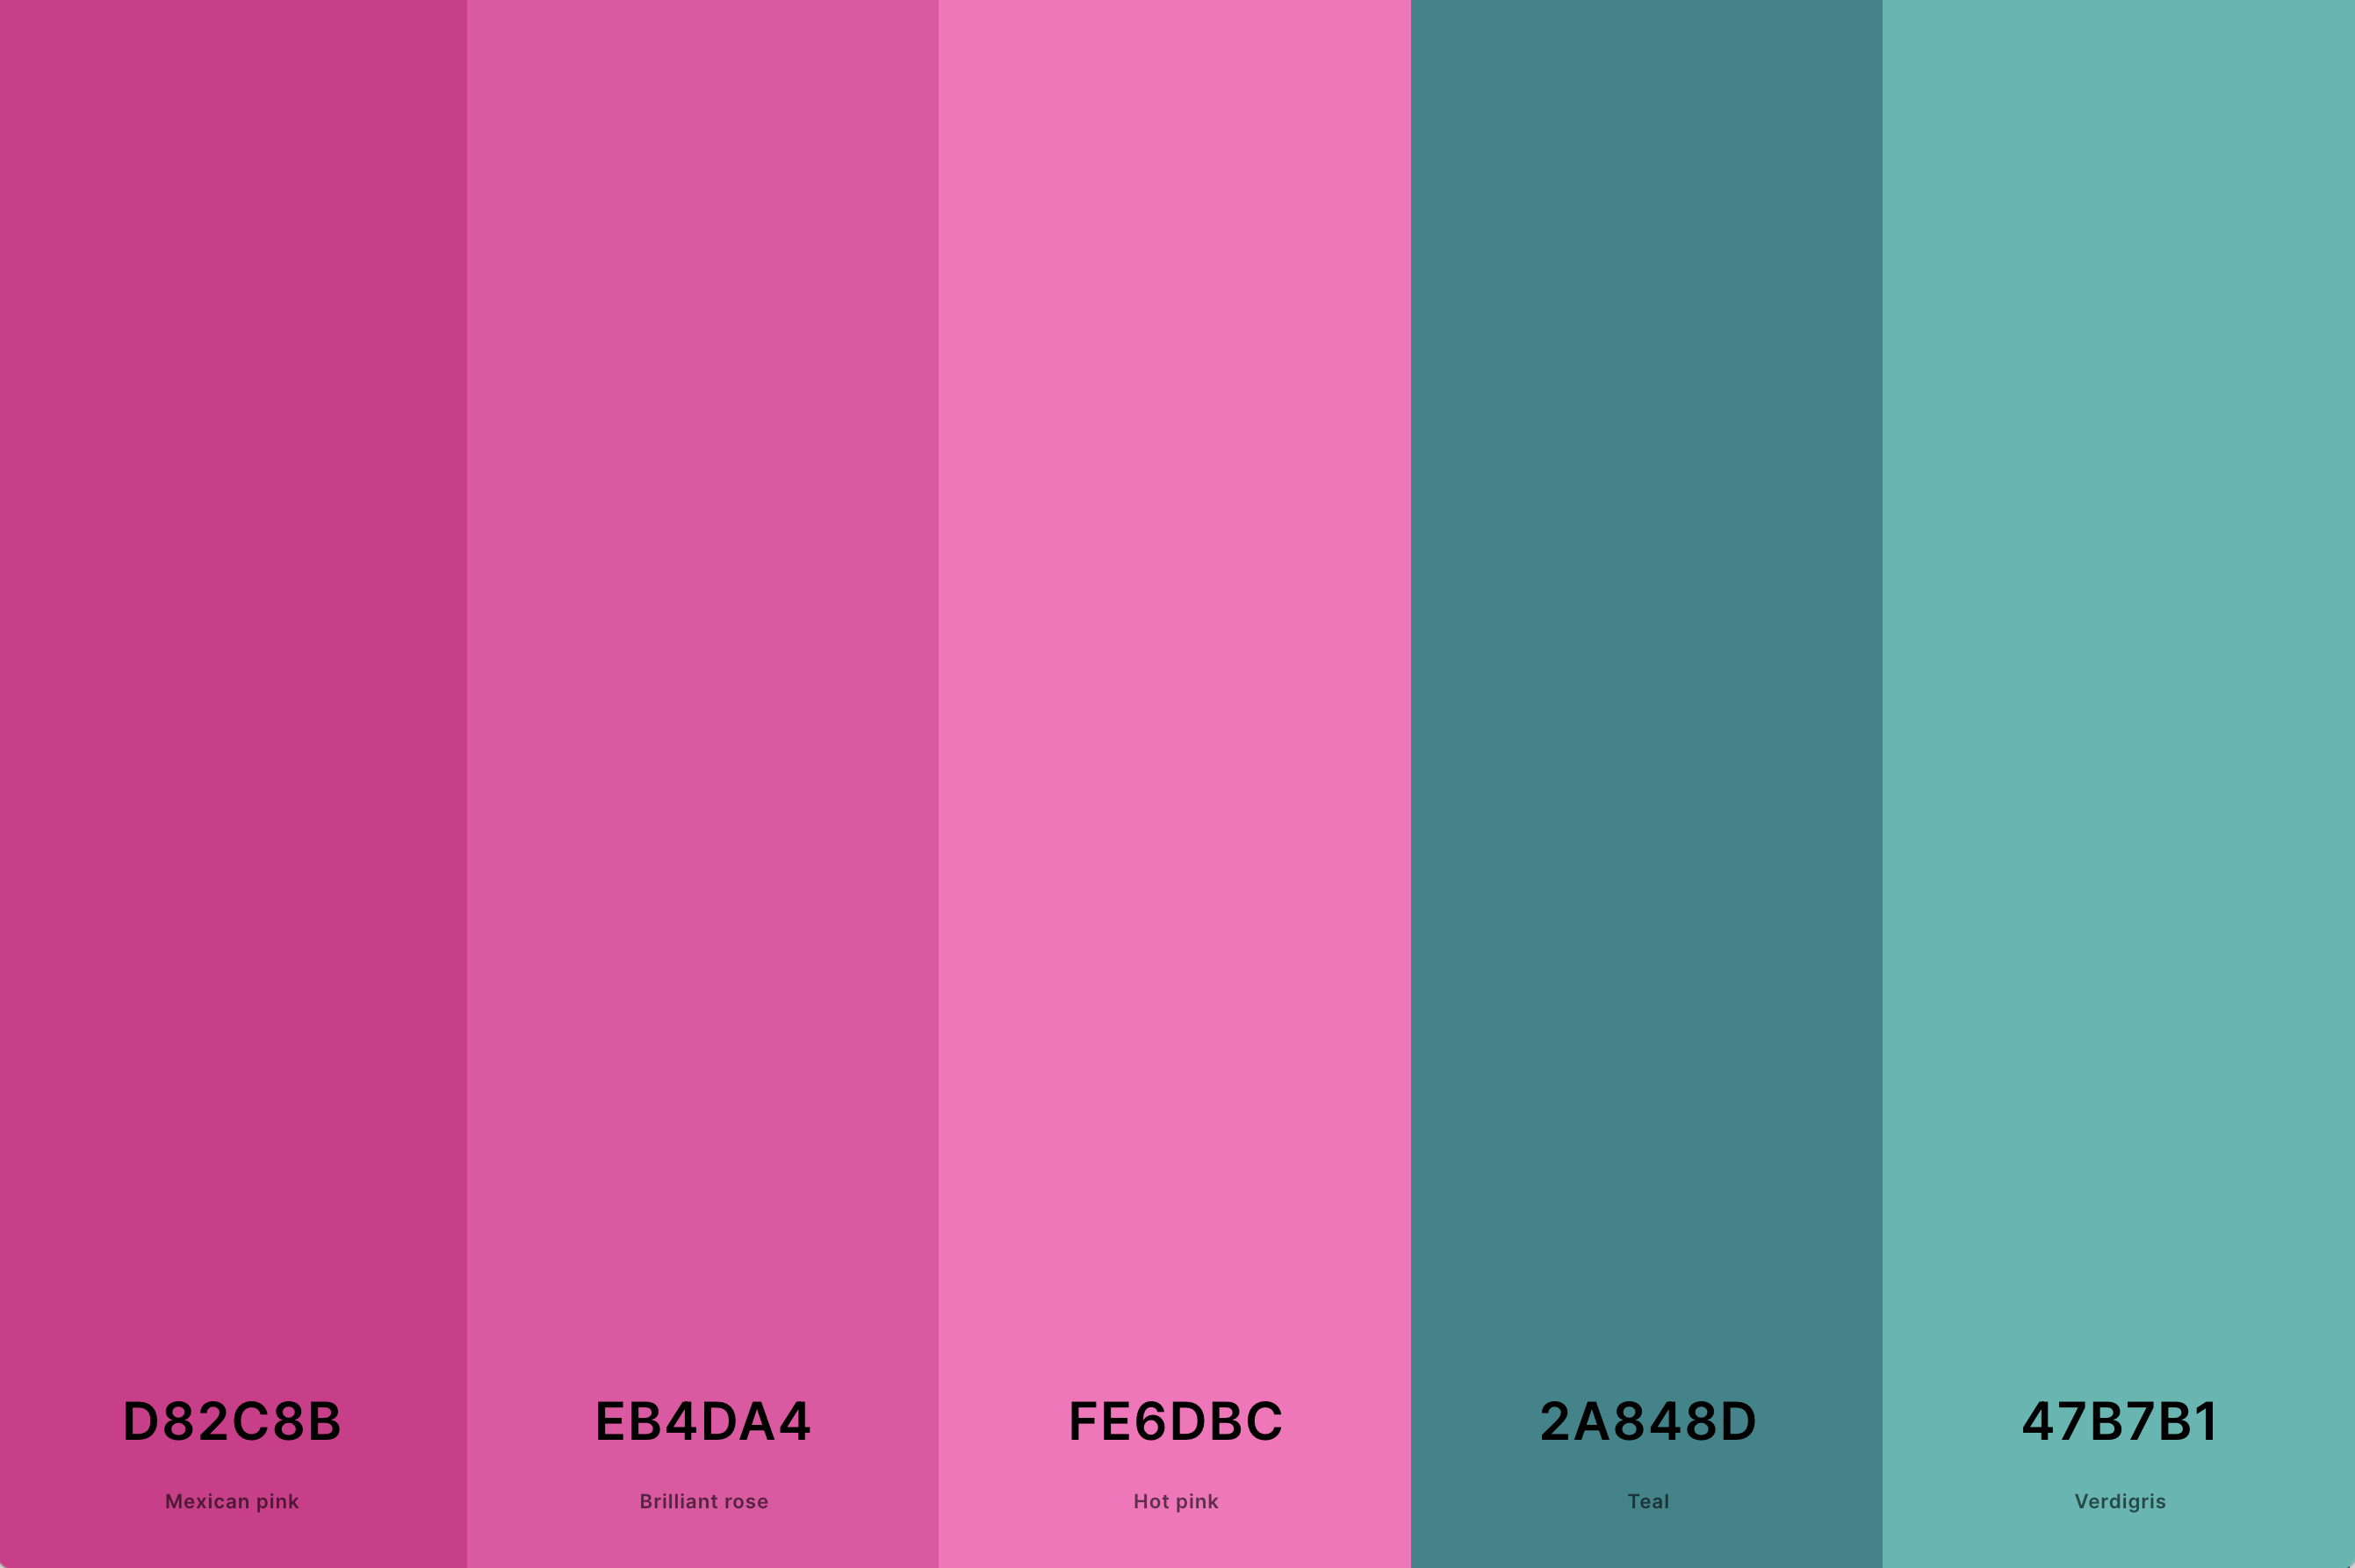 24. Teal And Pink Color Palette Color Palette with Mexican Pink (Hex #D82C8B) + Brilliant Rose (Hex #EB4DA4) + Hot Pink (Hex #FE6DBC) + Teal (Hex #2A848D) + Verdigris (Hex #47B7B1) Color Palette with Hex Codes